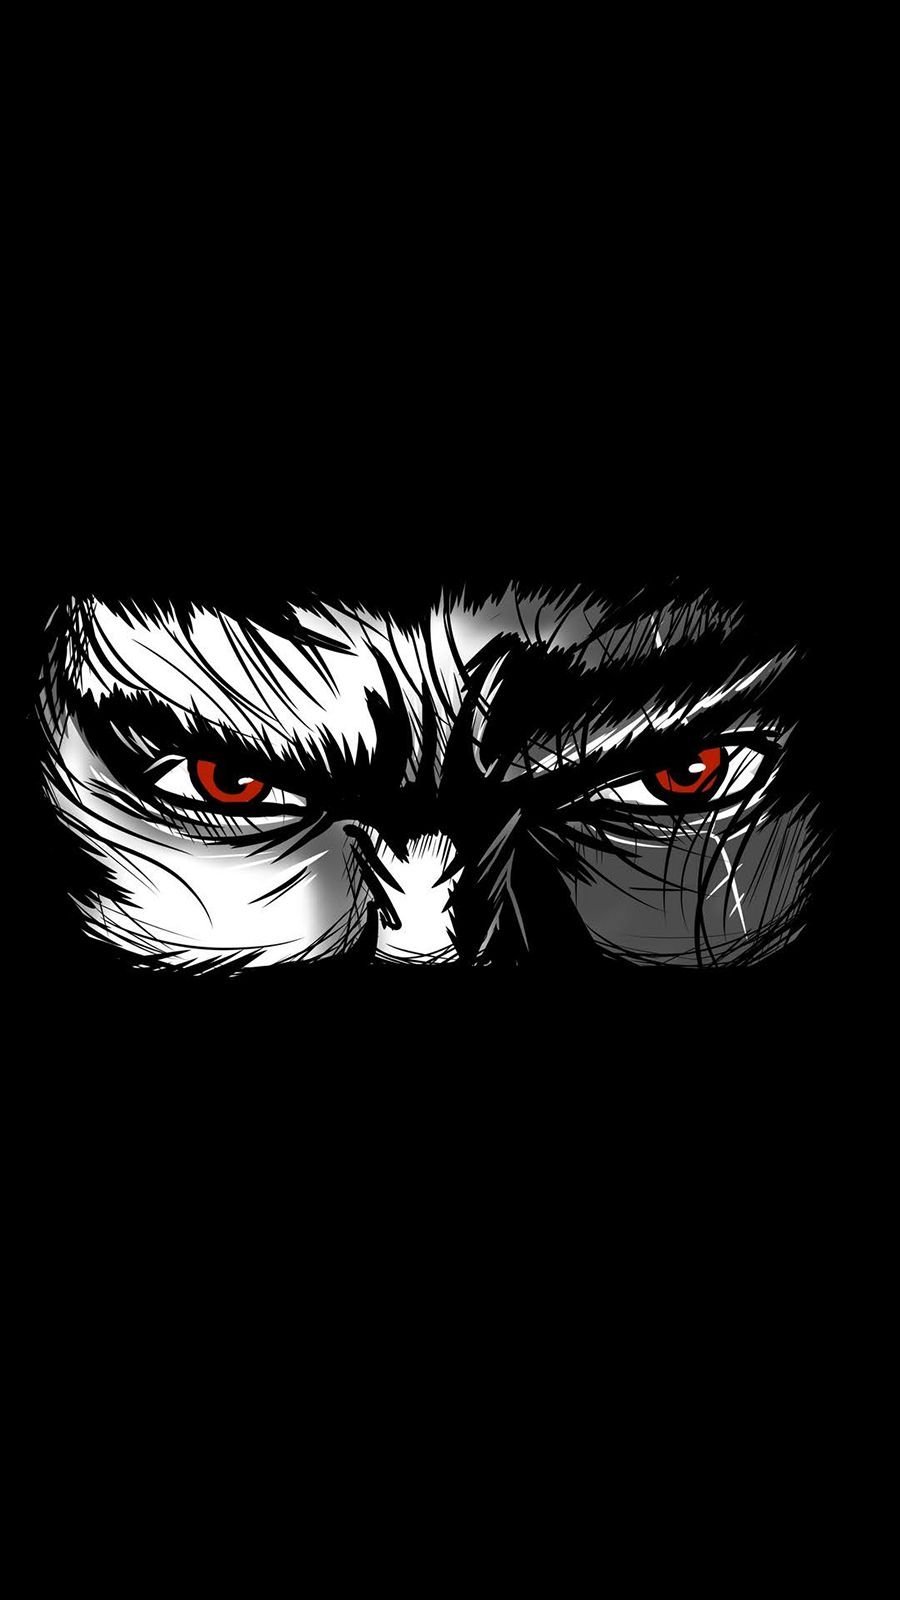 Angry eyes anime Wallpapers Download